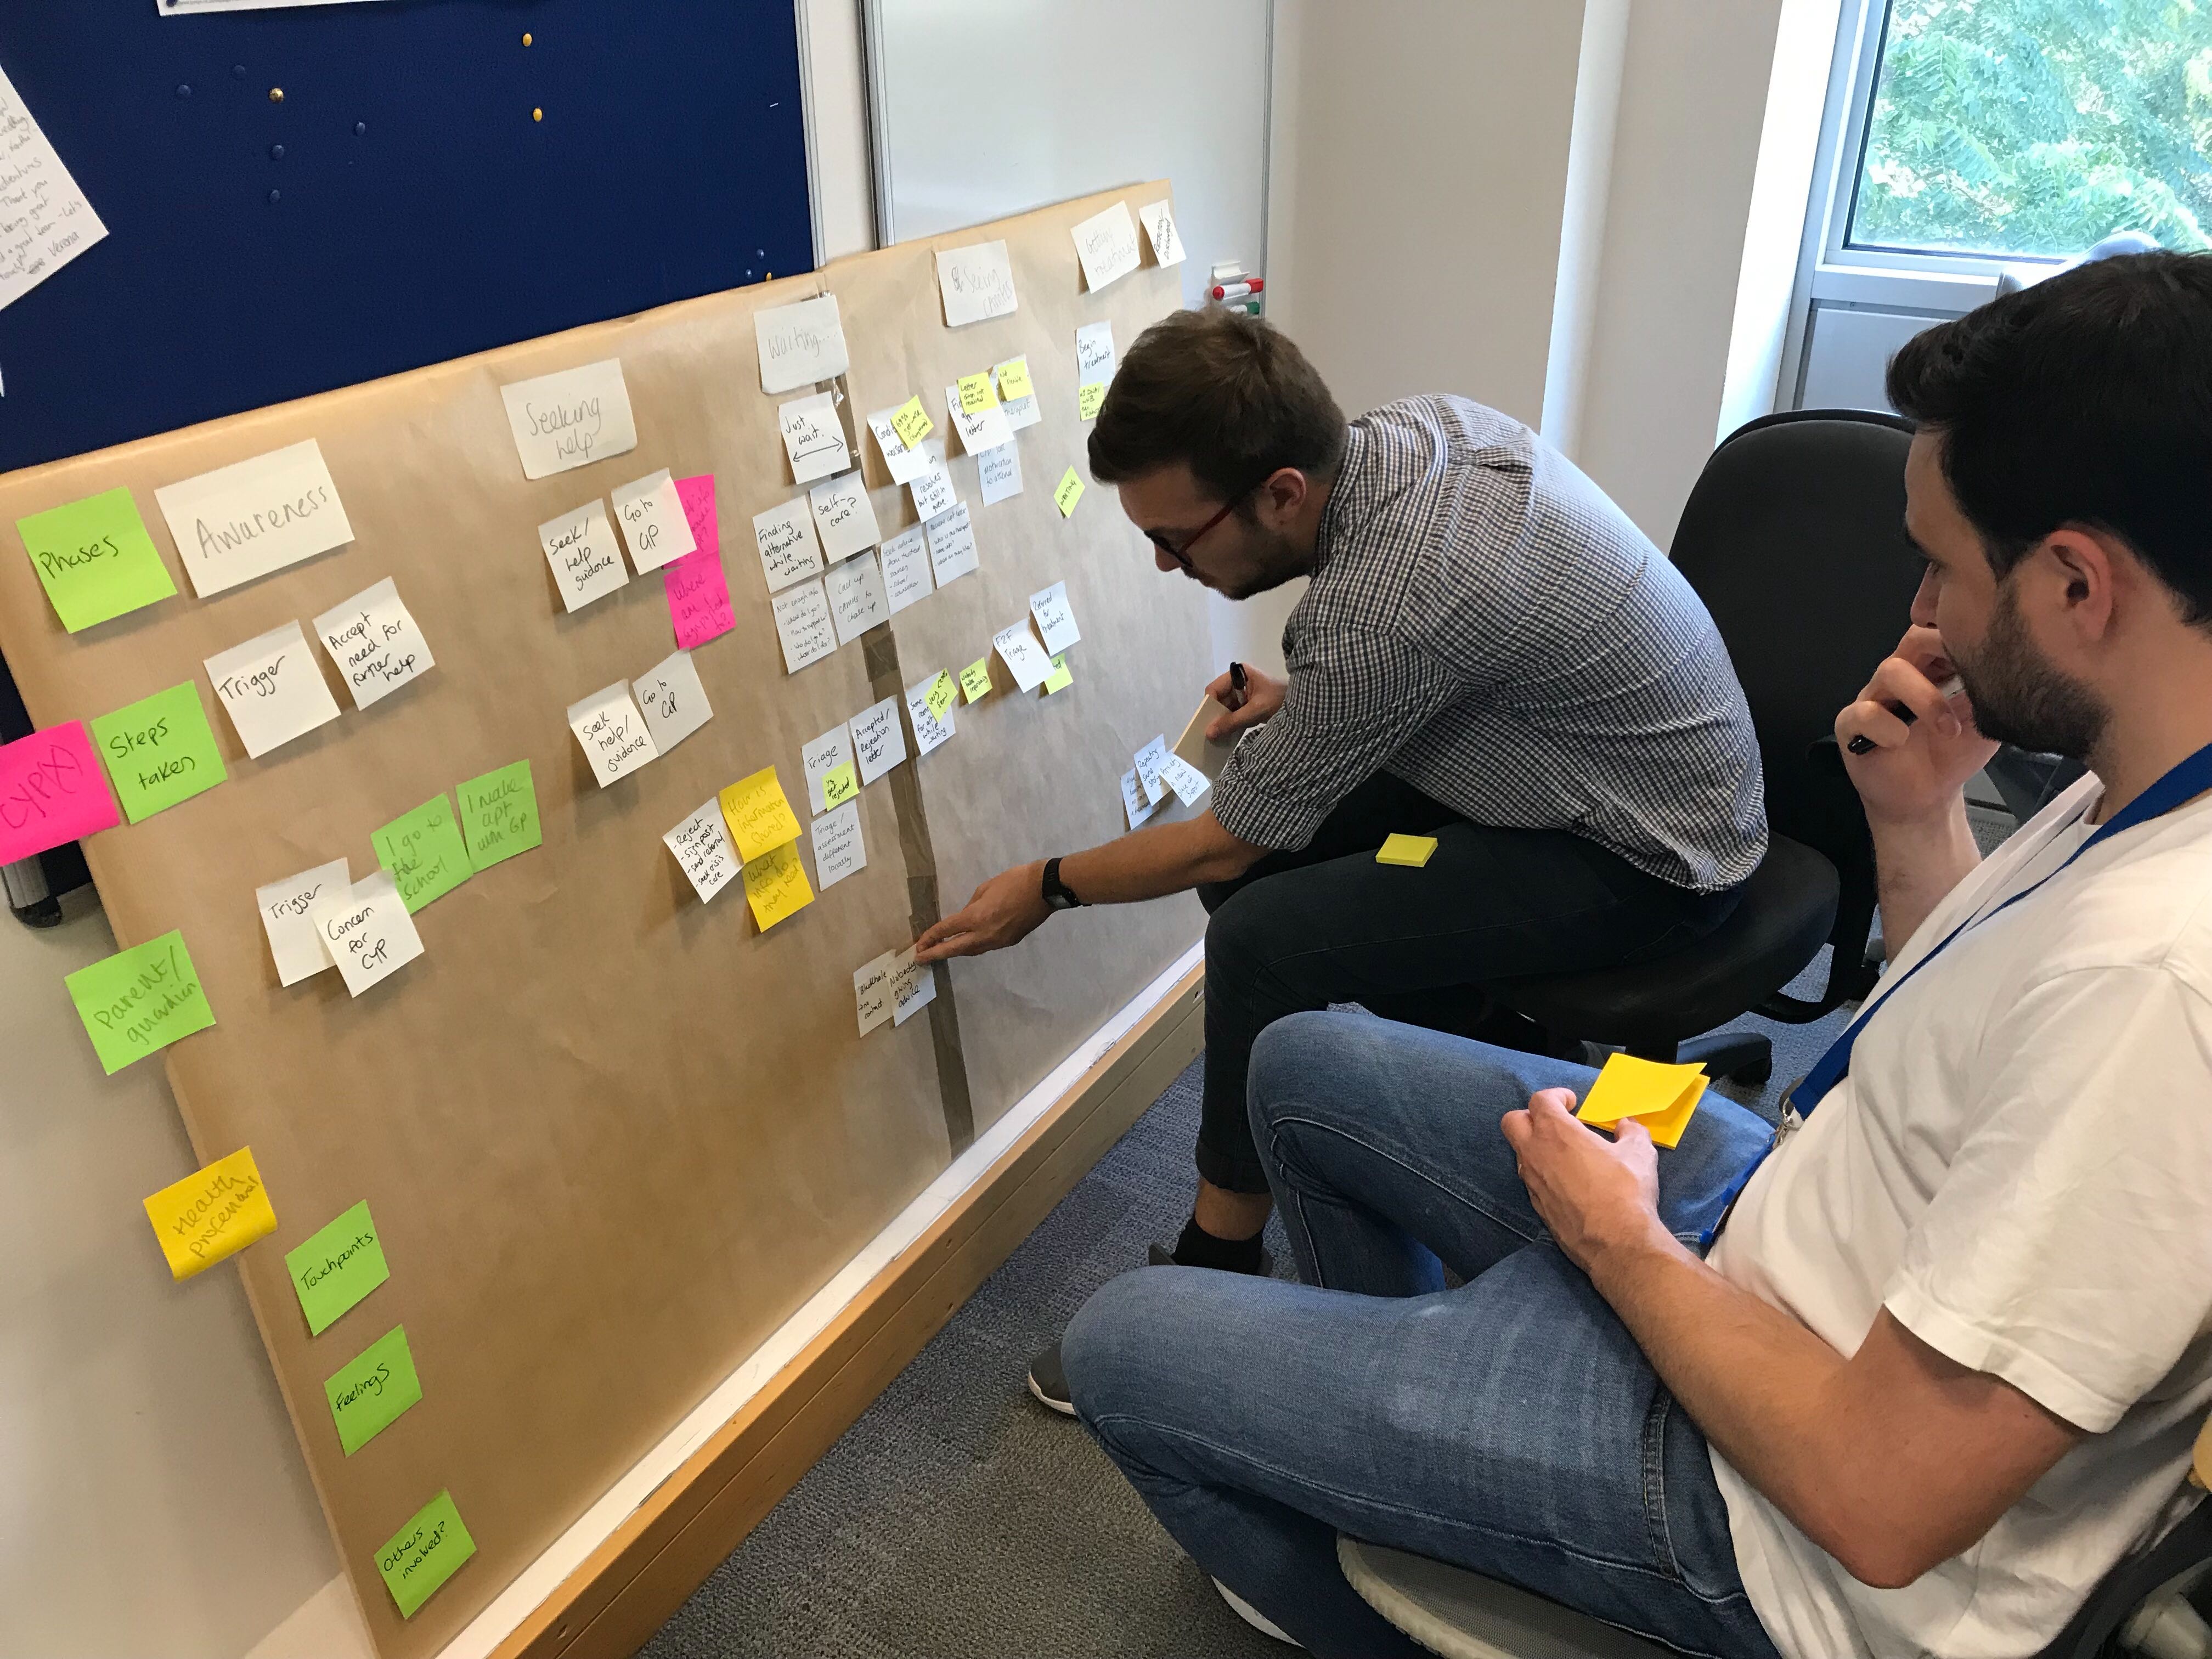 Colin and colleague are creating a user journey map with post it notes